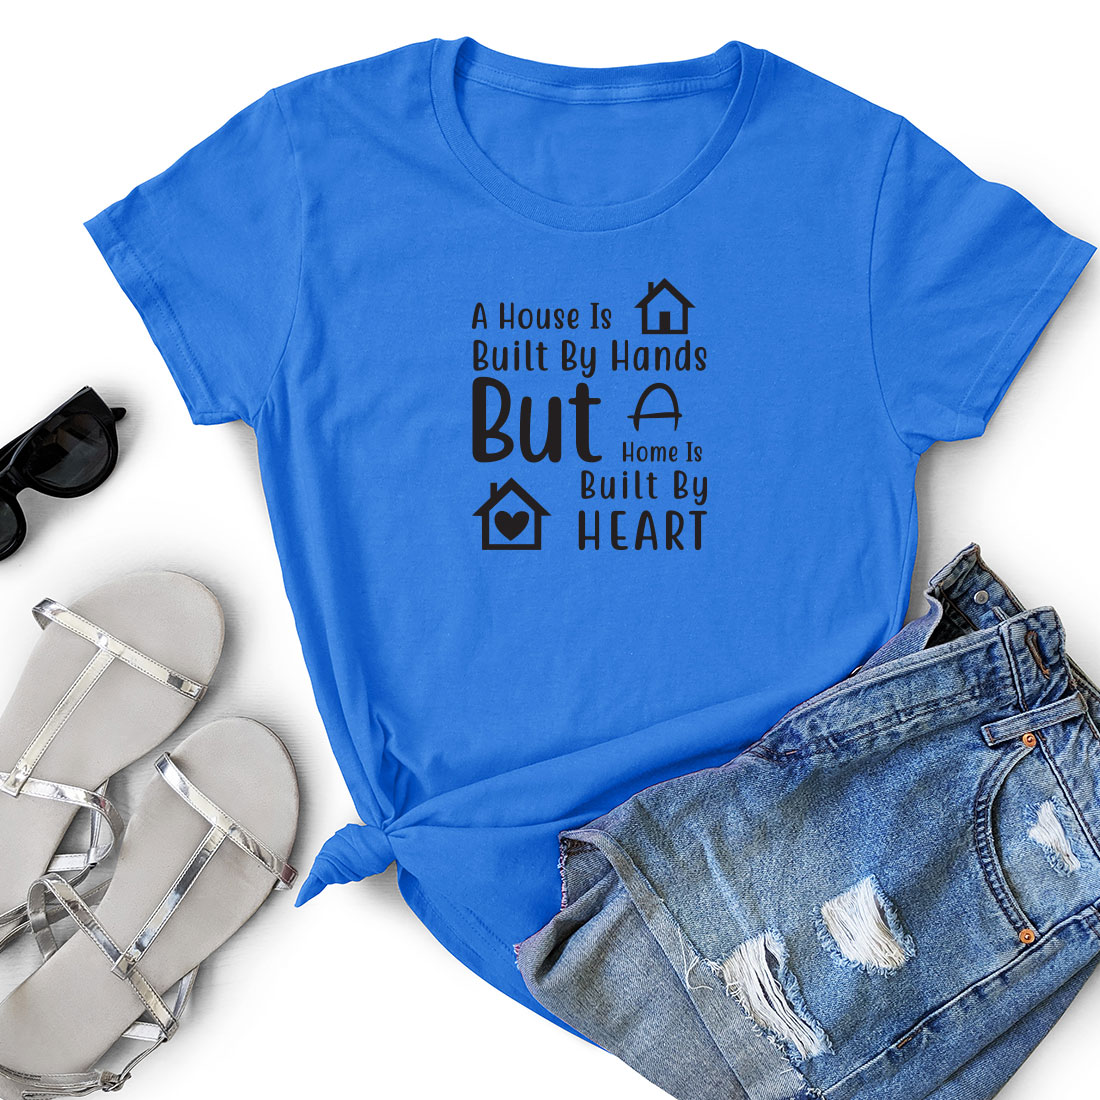 T - shirt that says a house is built but a house is built by.